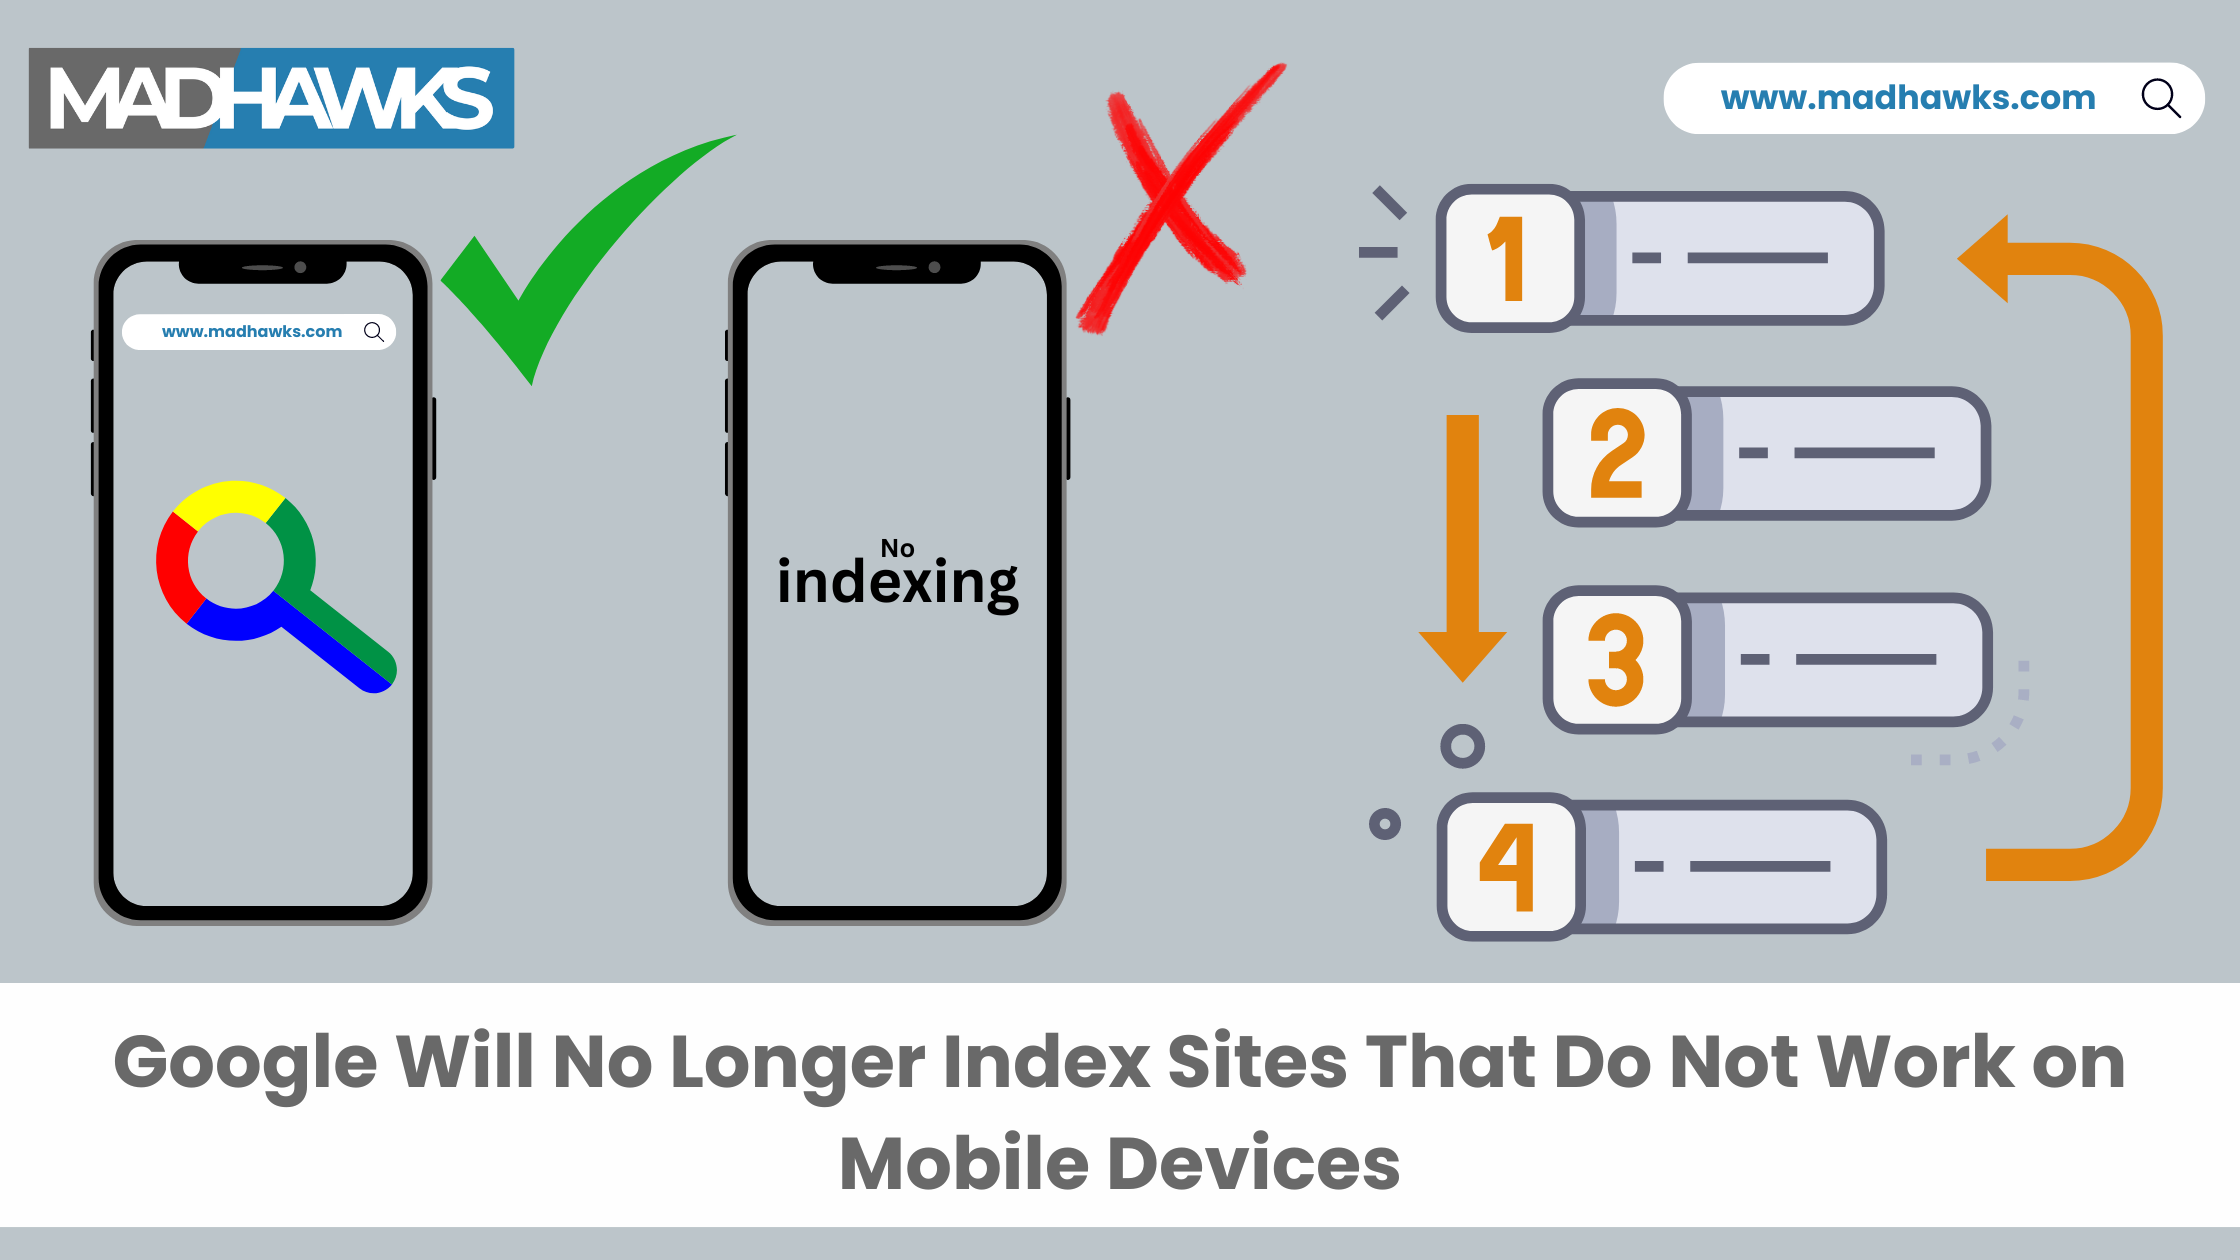 Google Will No Longer Index Sites That Do Not Work on Mobile Devices